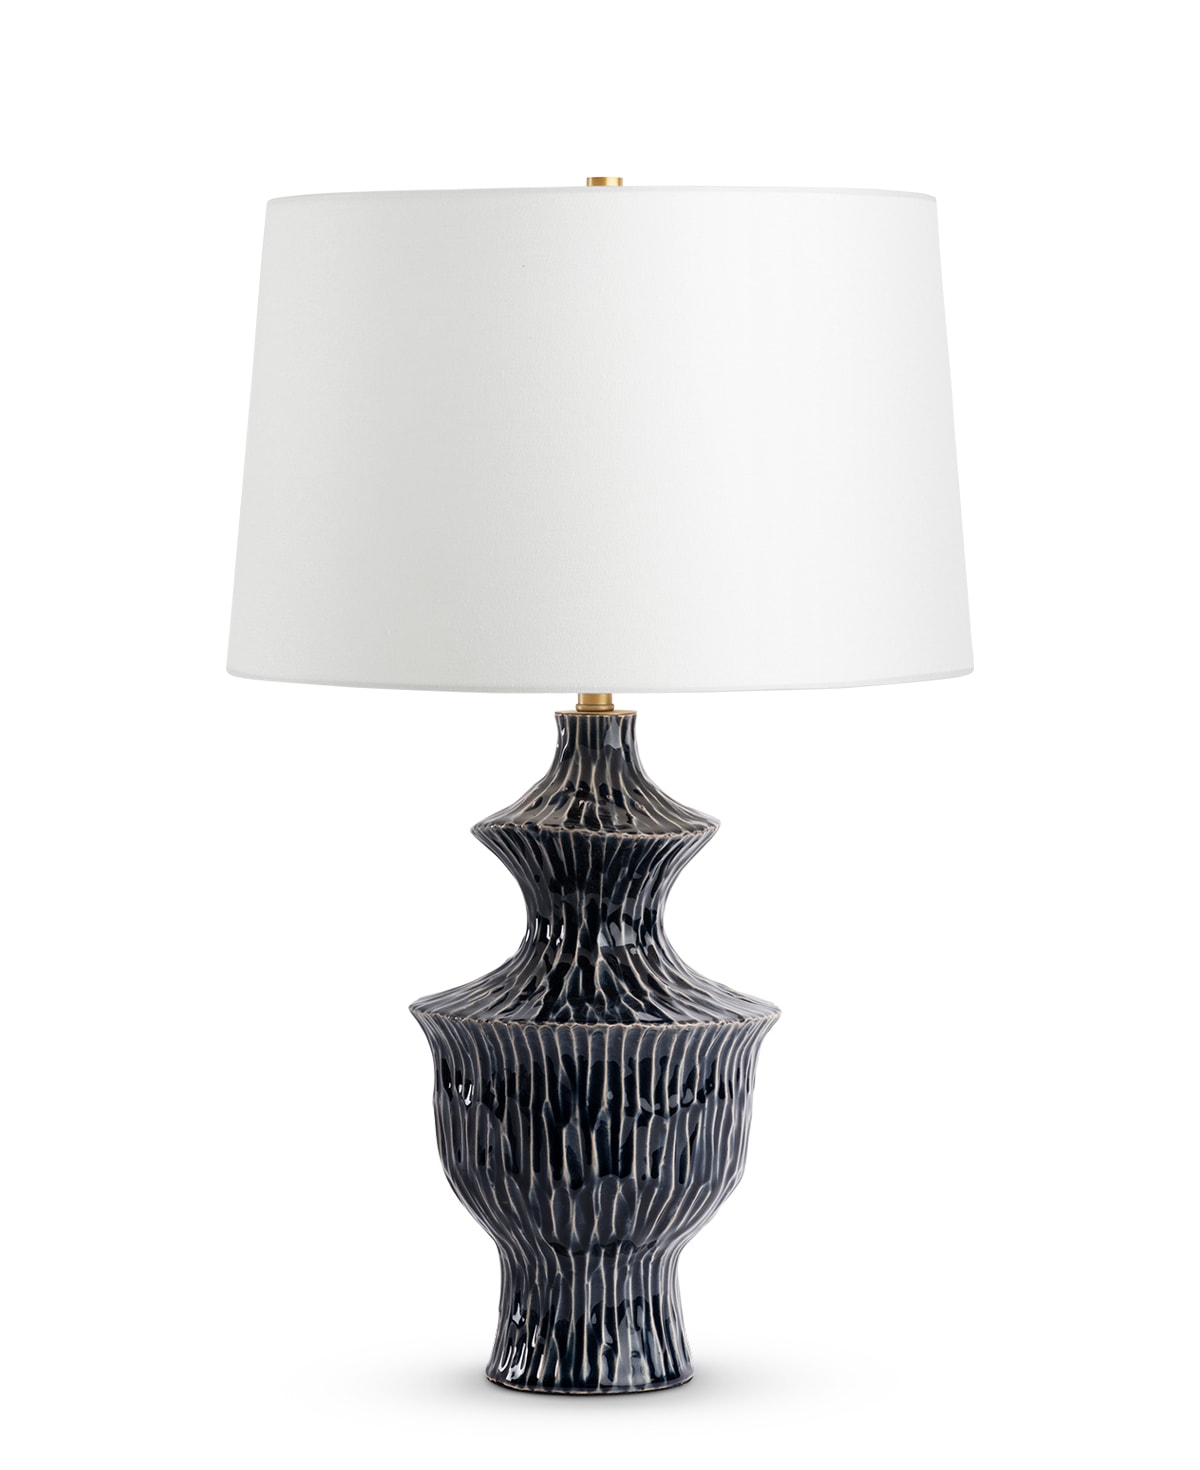 FlowDecor Crescent Table Lamp in ceramic with blue finish and off-white linen tapered drum shade (# 4611)